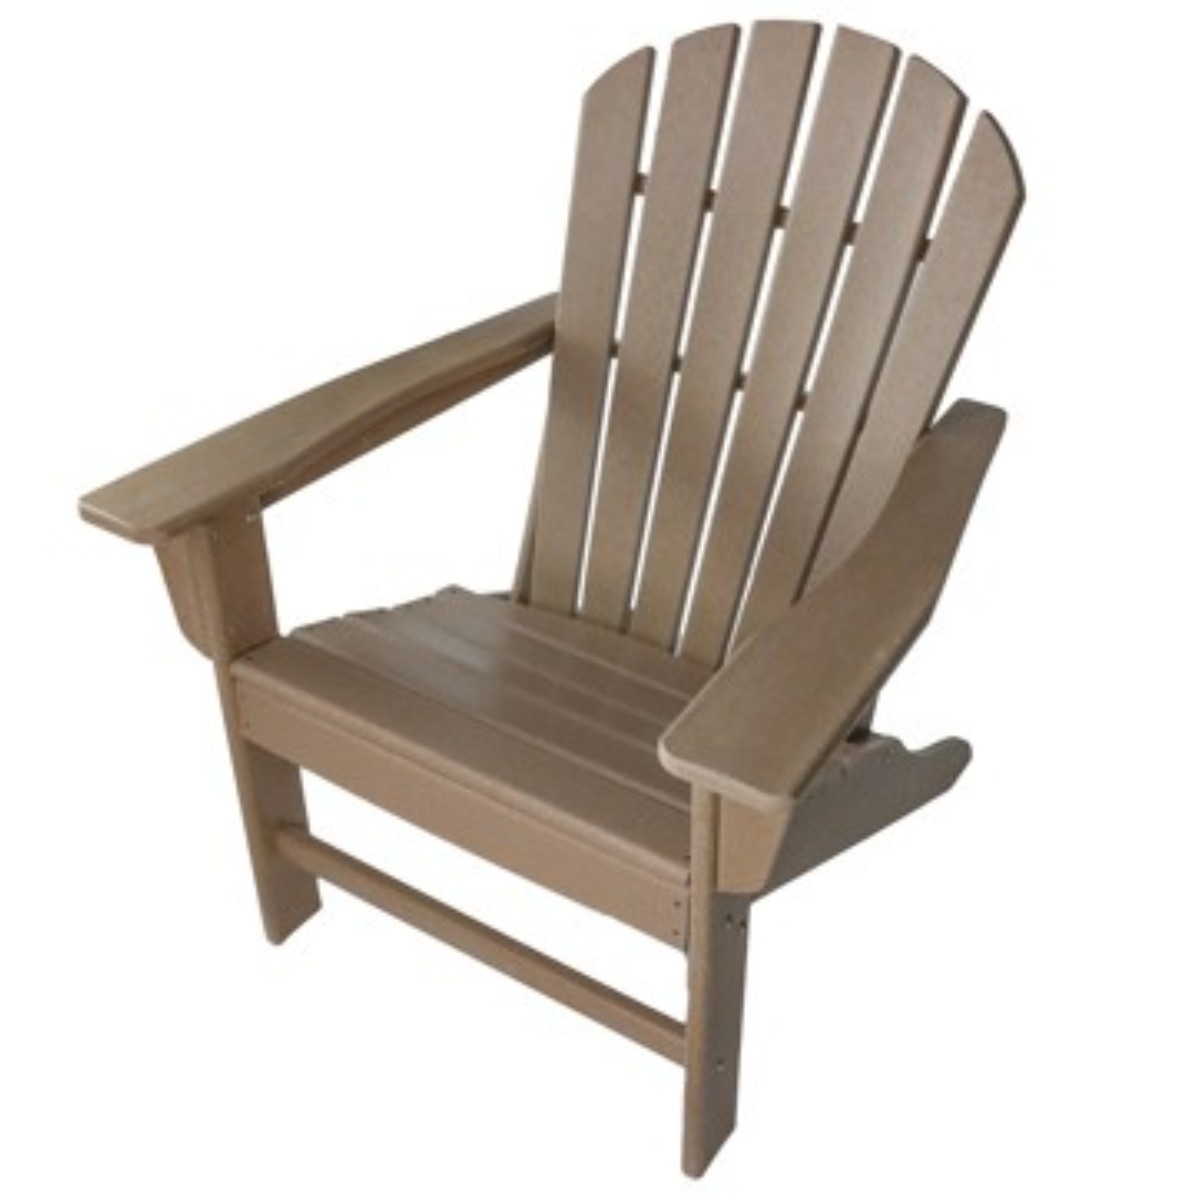 Adirondack Chair Resin, 350 lbs Capacity Load,Patio Chair Lawn Chair Outdoor Adirondack Chairs Weather Resistant for Patio Deck Garden 33.07*31.1*36.4" HDPE Resin Wood,Brown - image 5 of 8